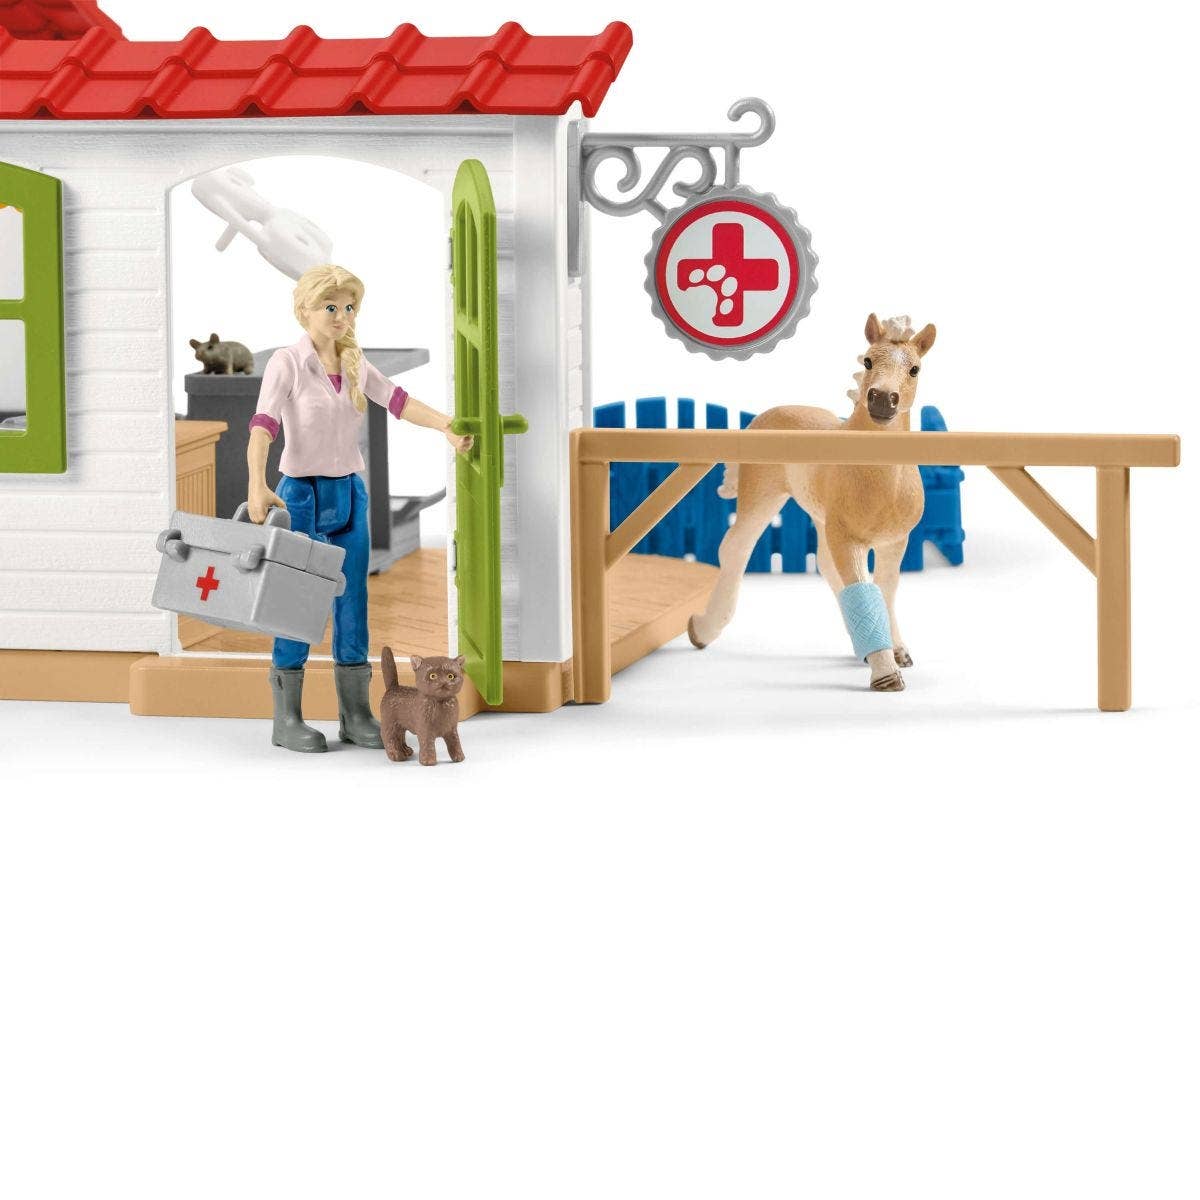 Veterinary Practice With Pets Farm Figurine Toys Play Set